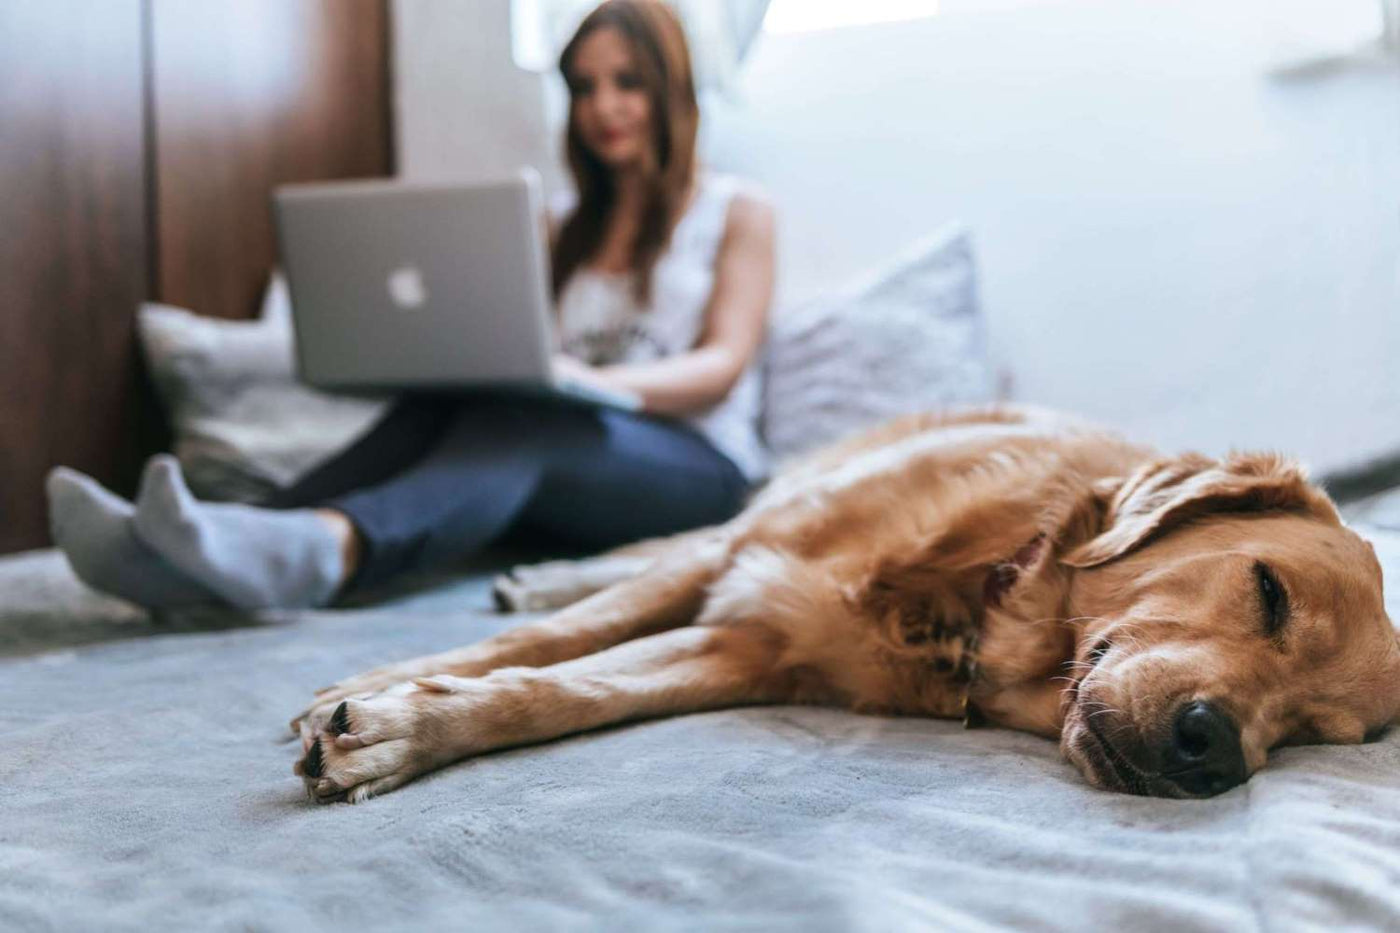 A woman works on her laptop while a tan dog lays beside her